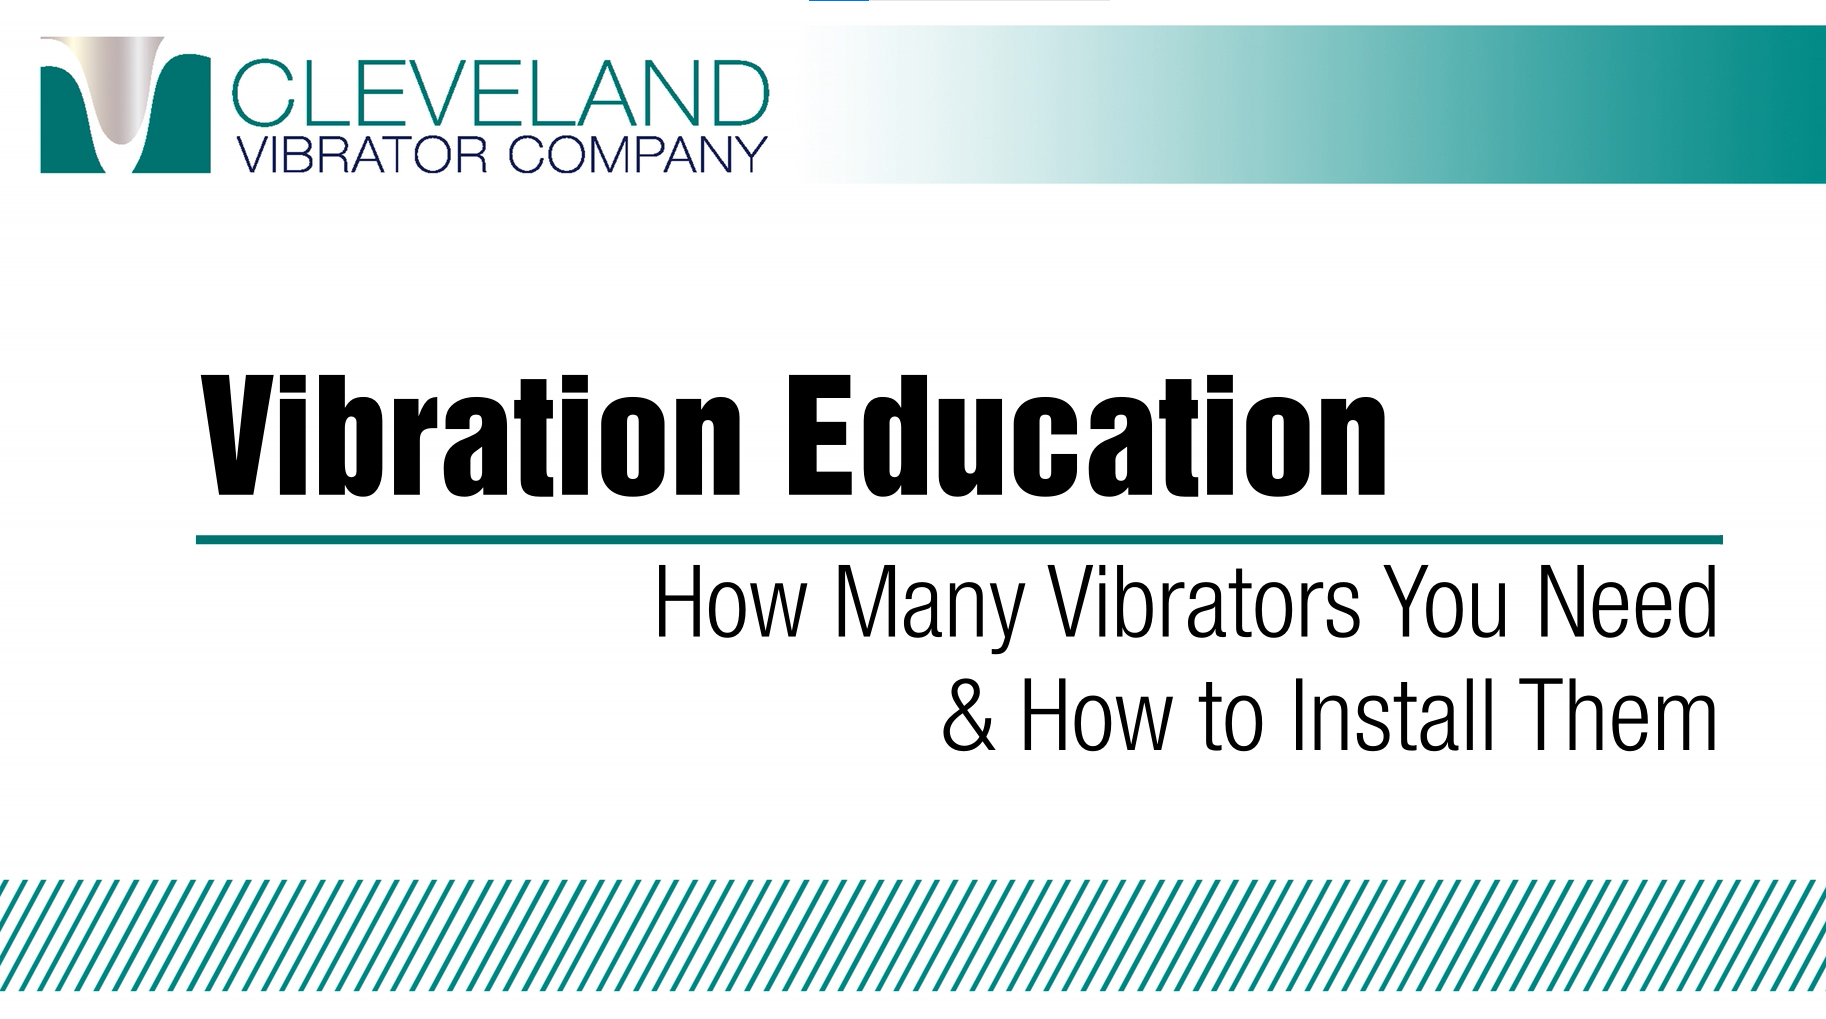 Determine the Number of Vibrators You Need and How to Install Them